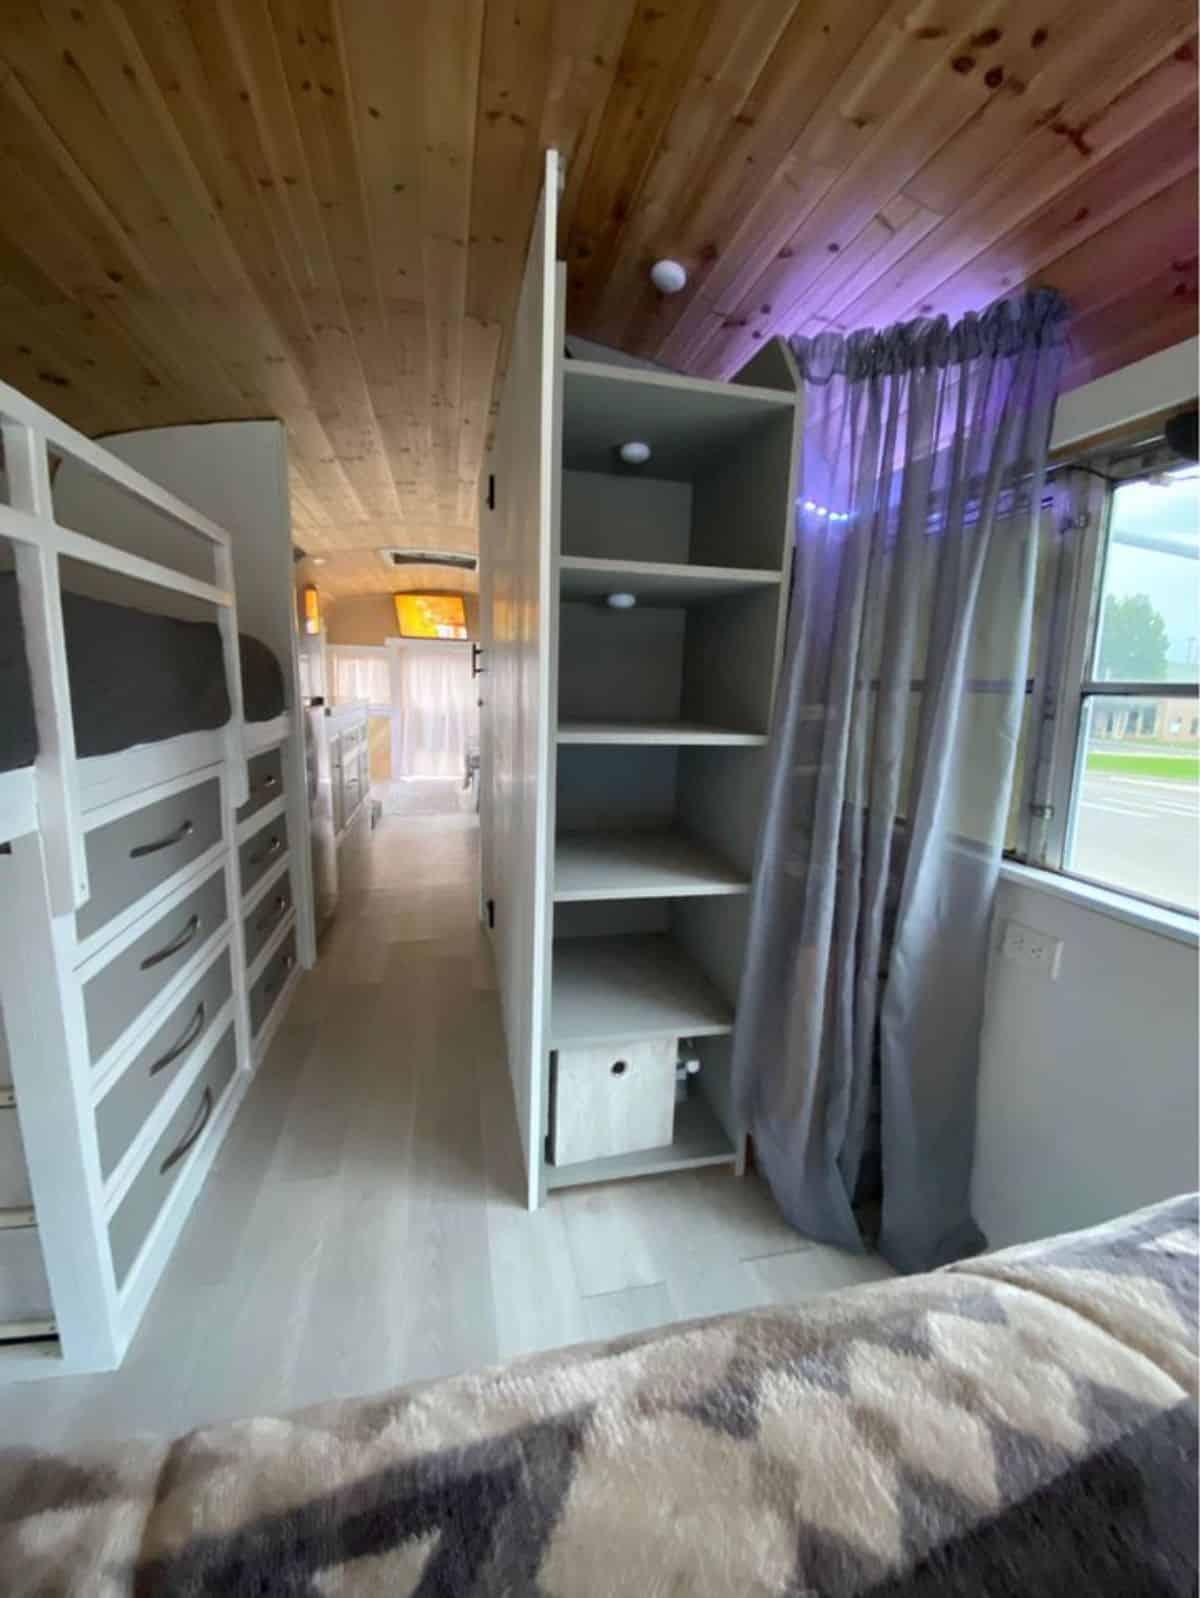 Storage cabinets in front of sleeping area